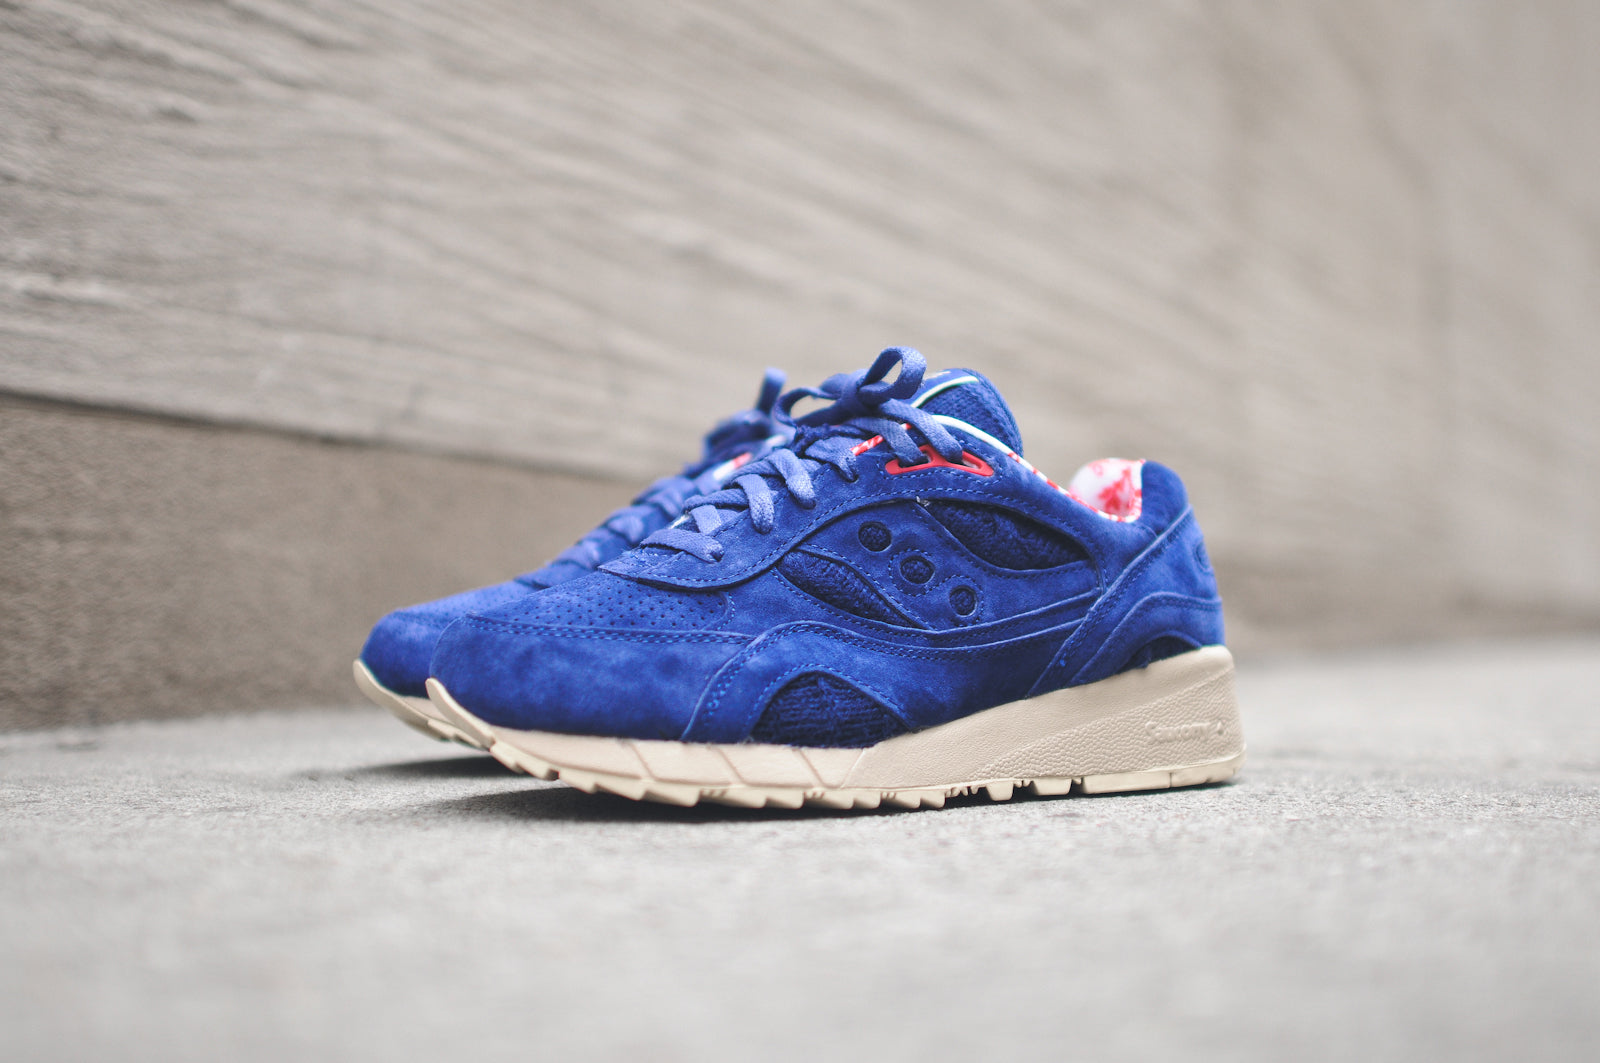 saucony shadow 6000 sweater pack